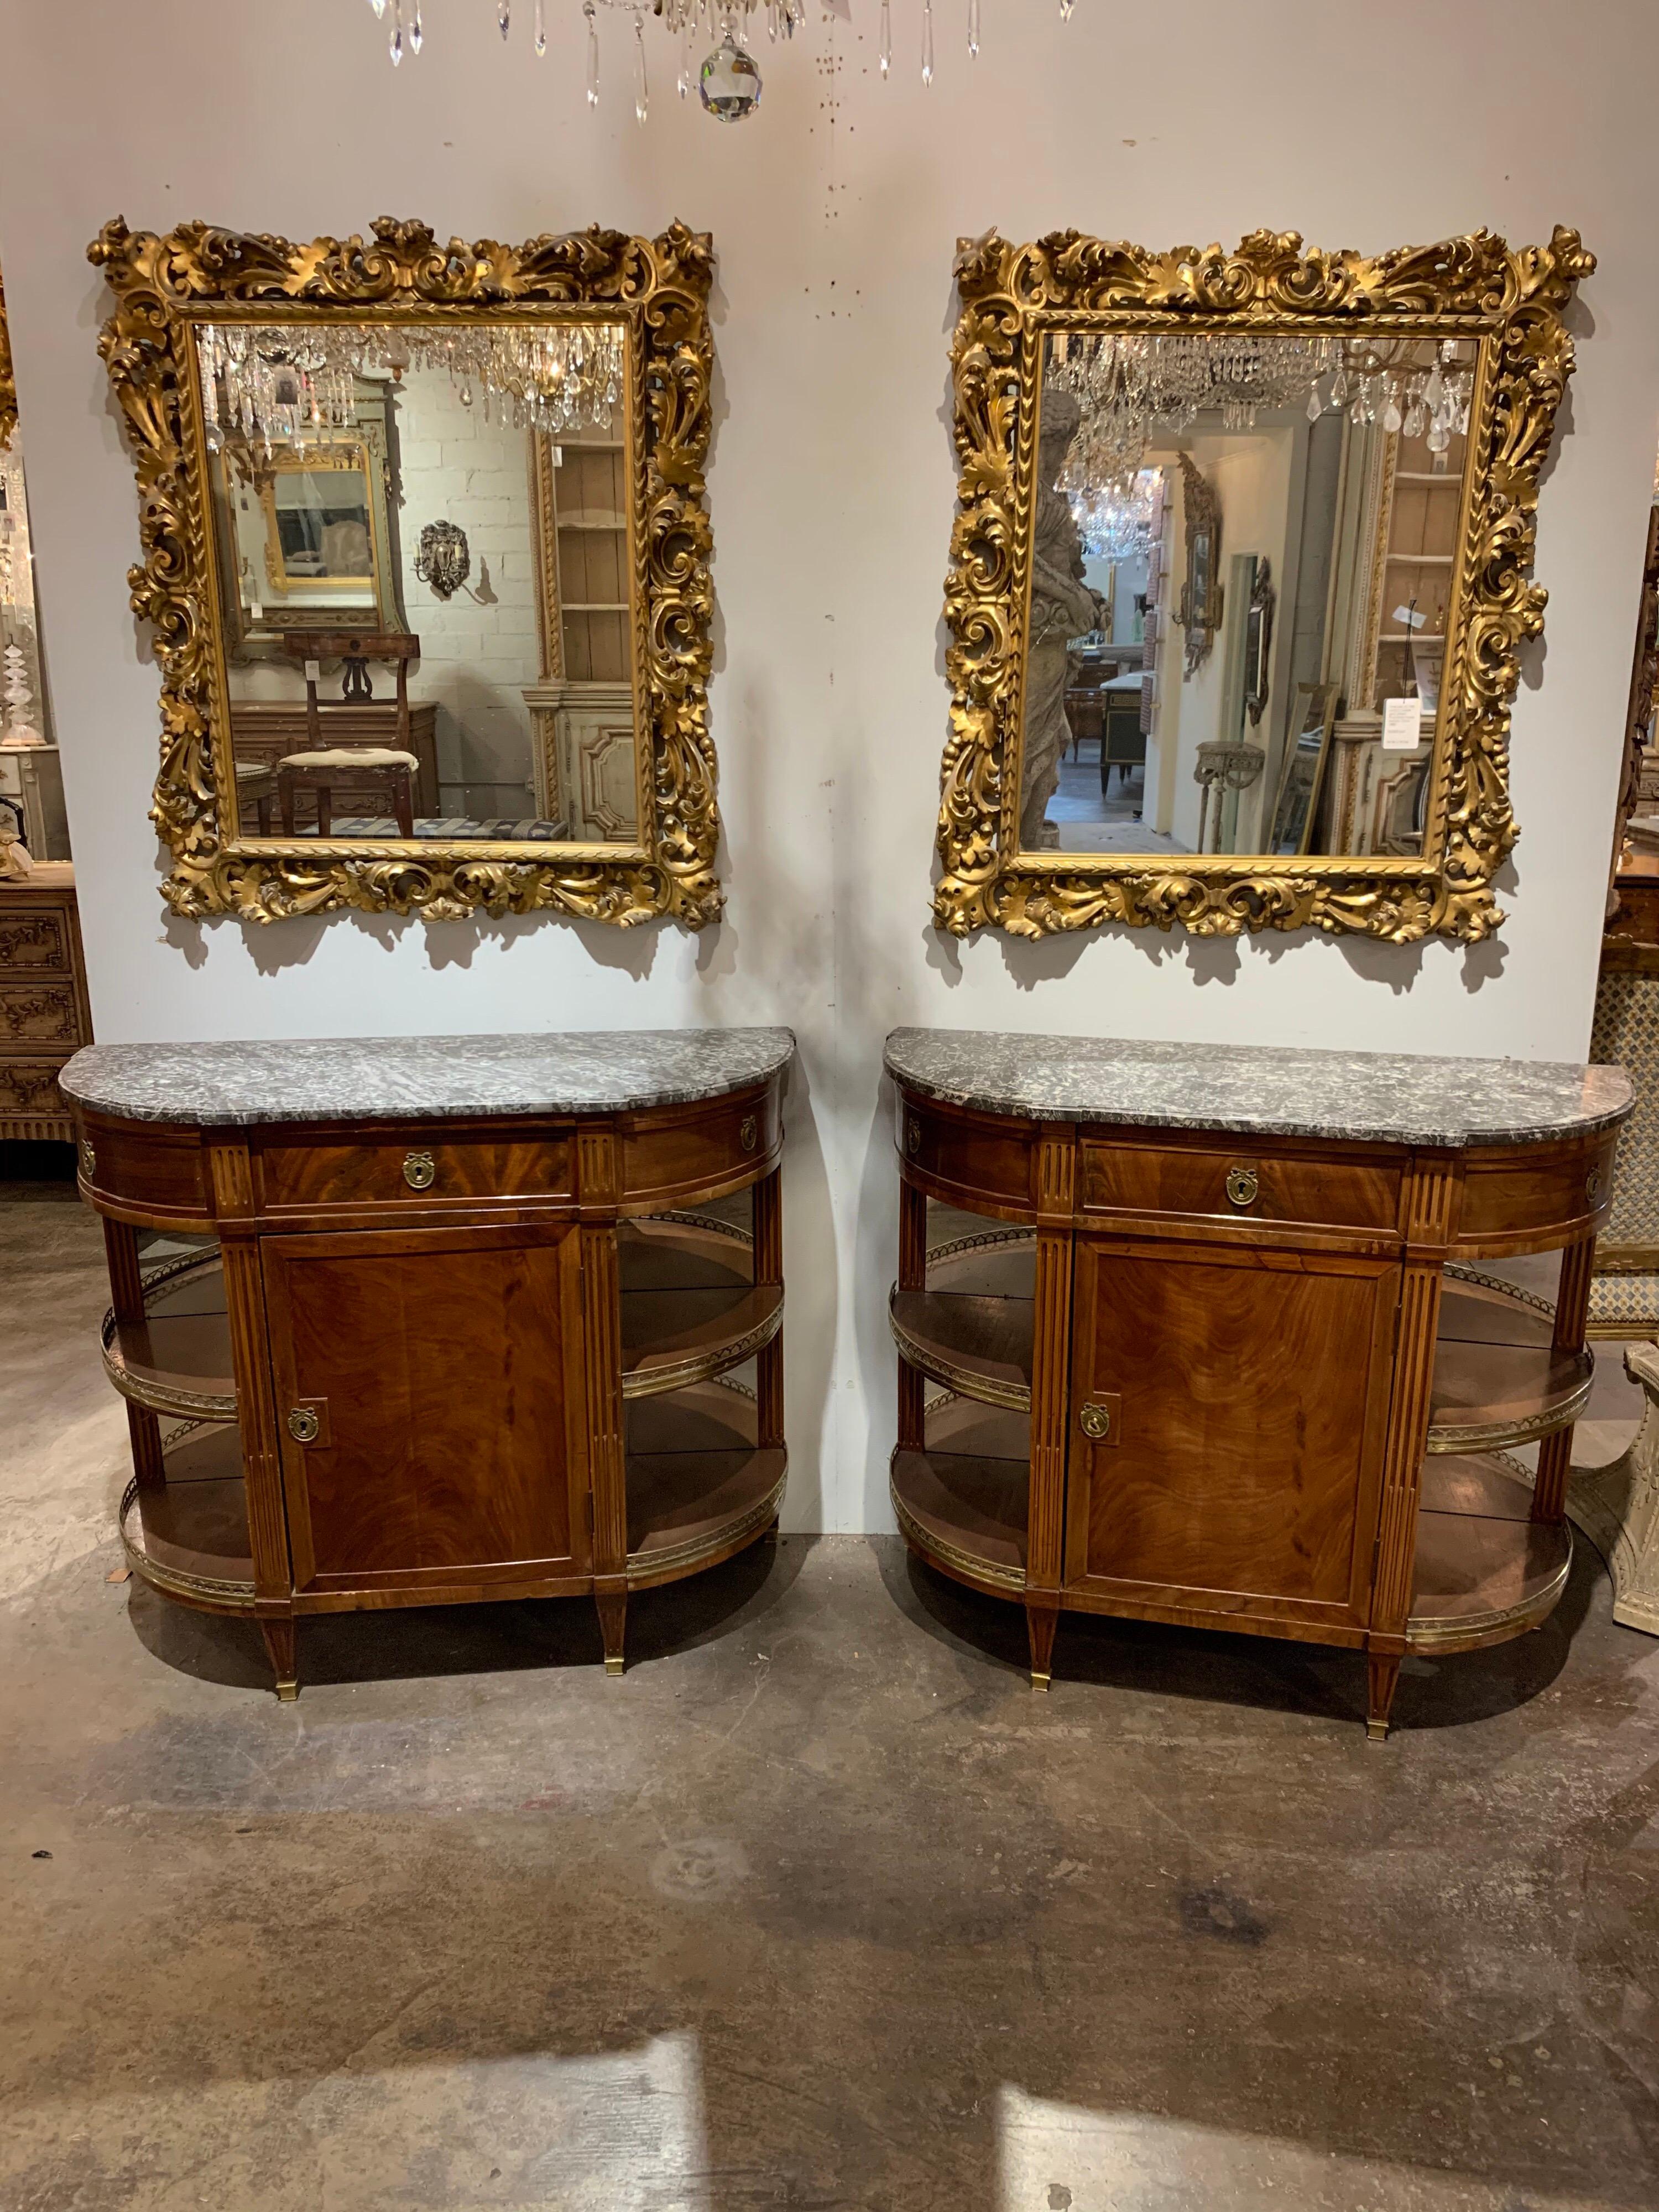 Lovely pair of French Directoire style mahogany servers with beautiful grey marble tops. Very fine rich tone on the wood. And the piece has nice mirrored shelves on the sides and more storage inside the cabinet as well. Functional as well as stylish!